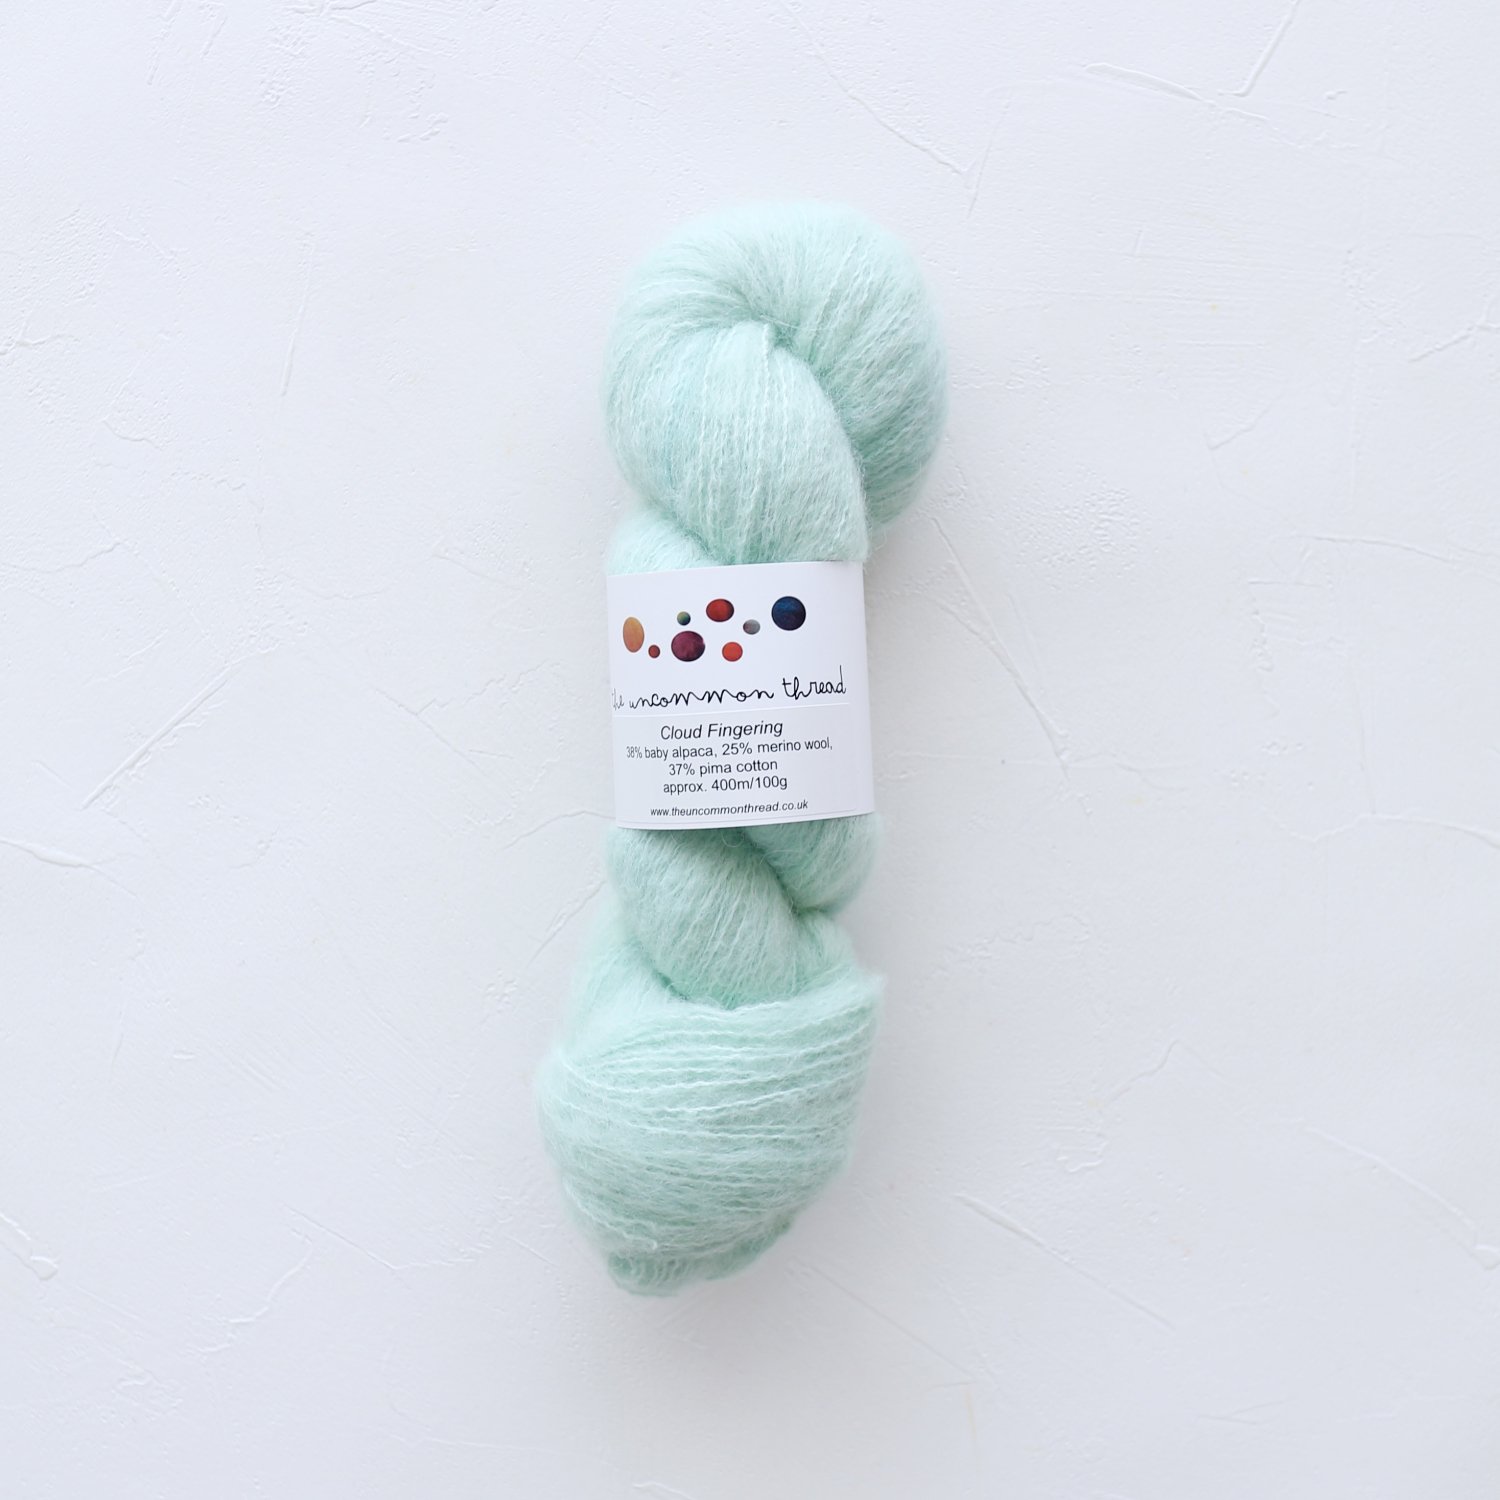 The Uncommon Thread<br >Cloud Fingering<br>Julep